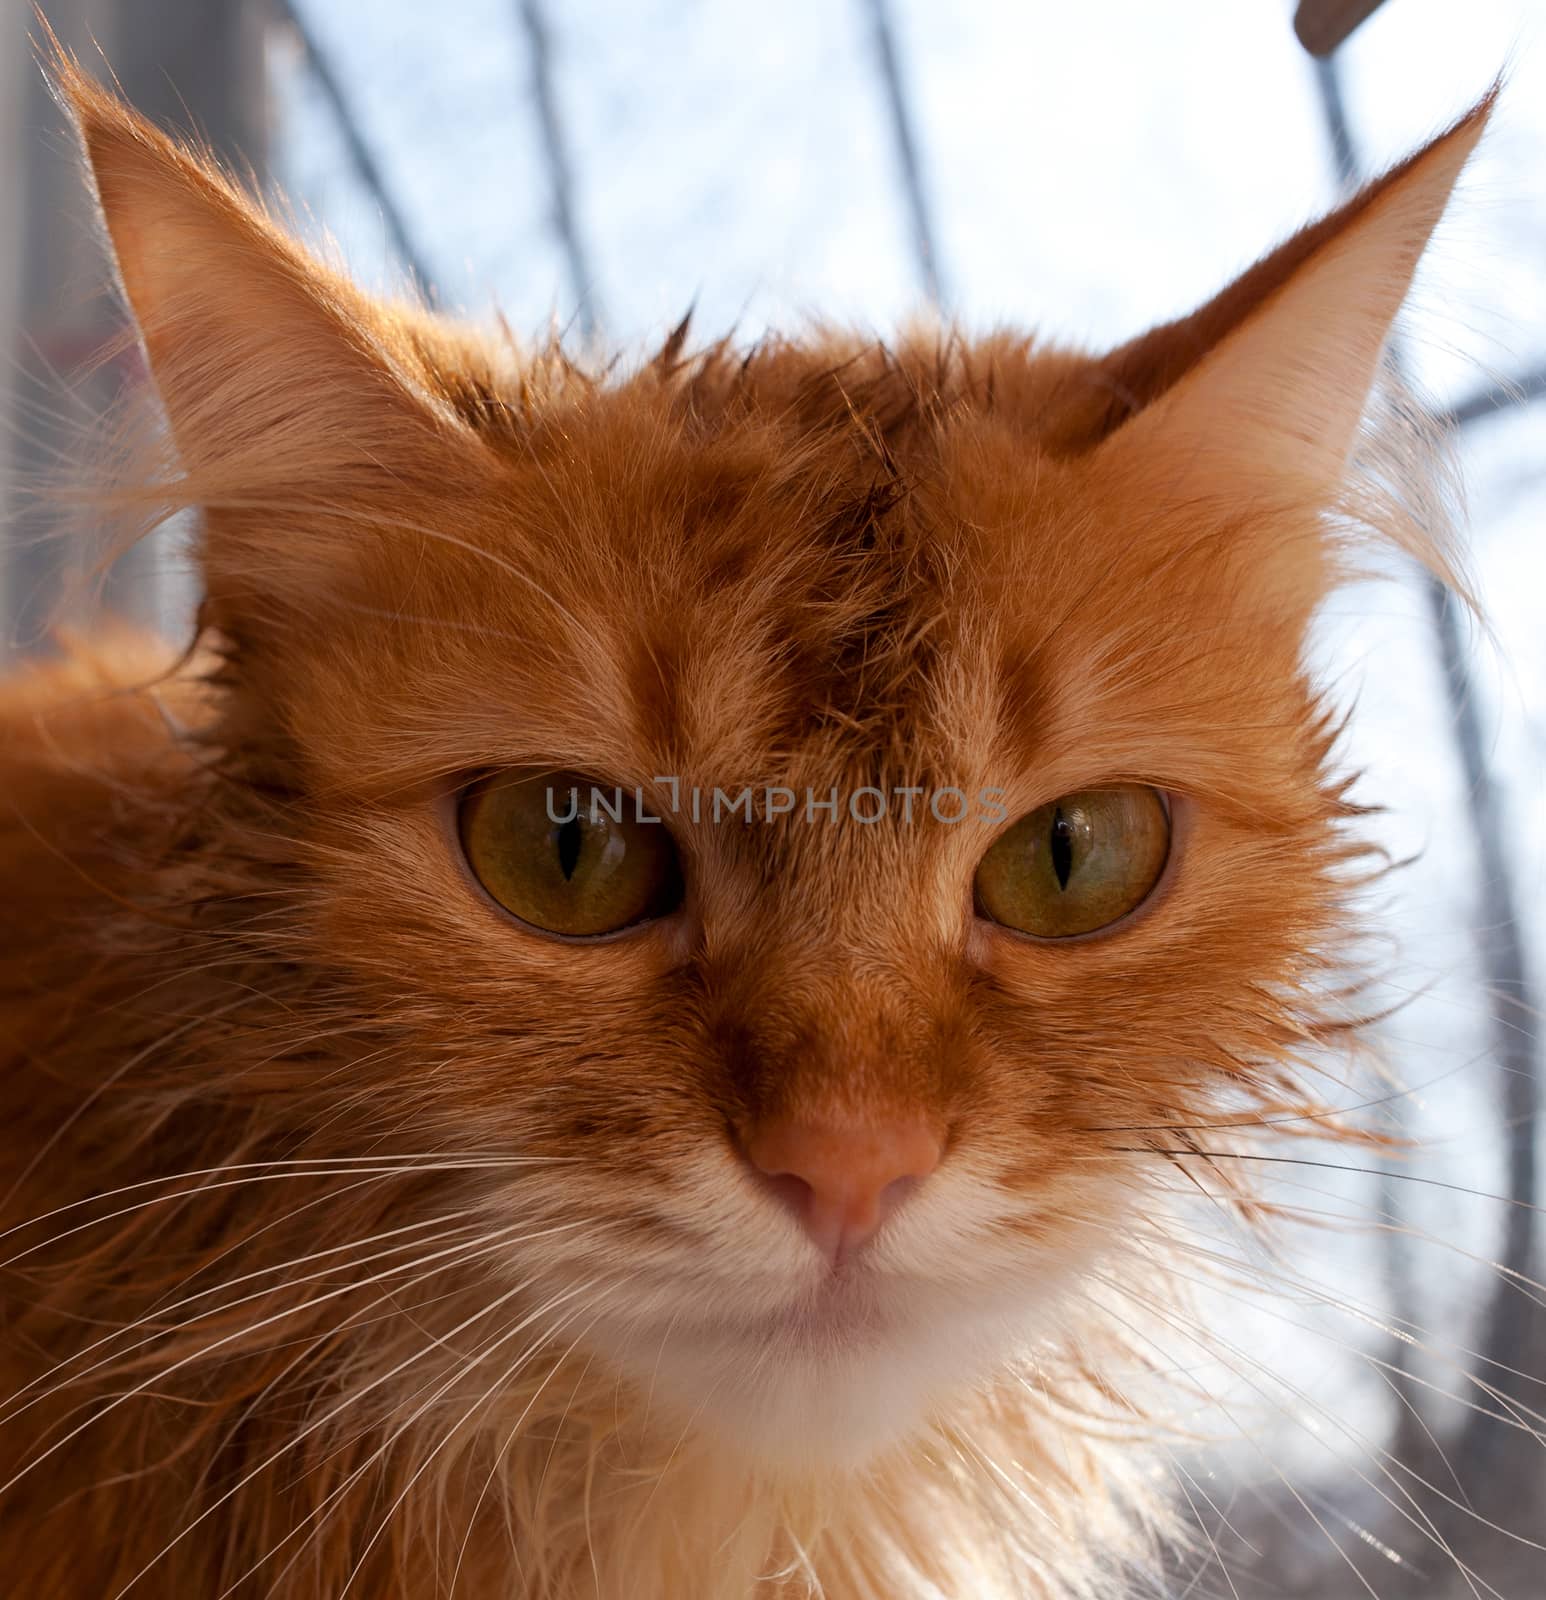 Muzzle red cat close-up, front view